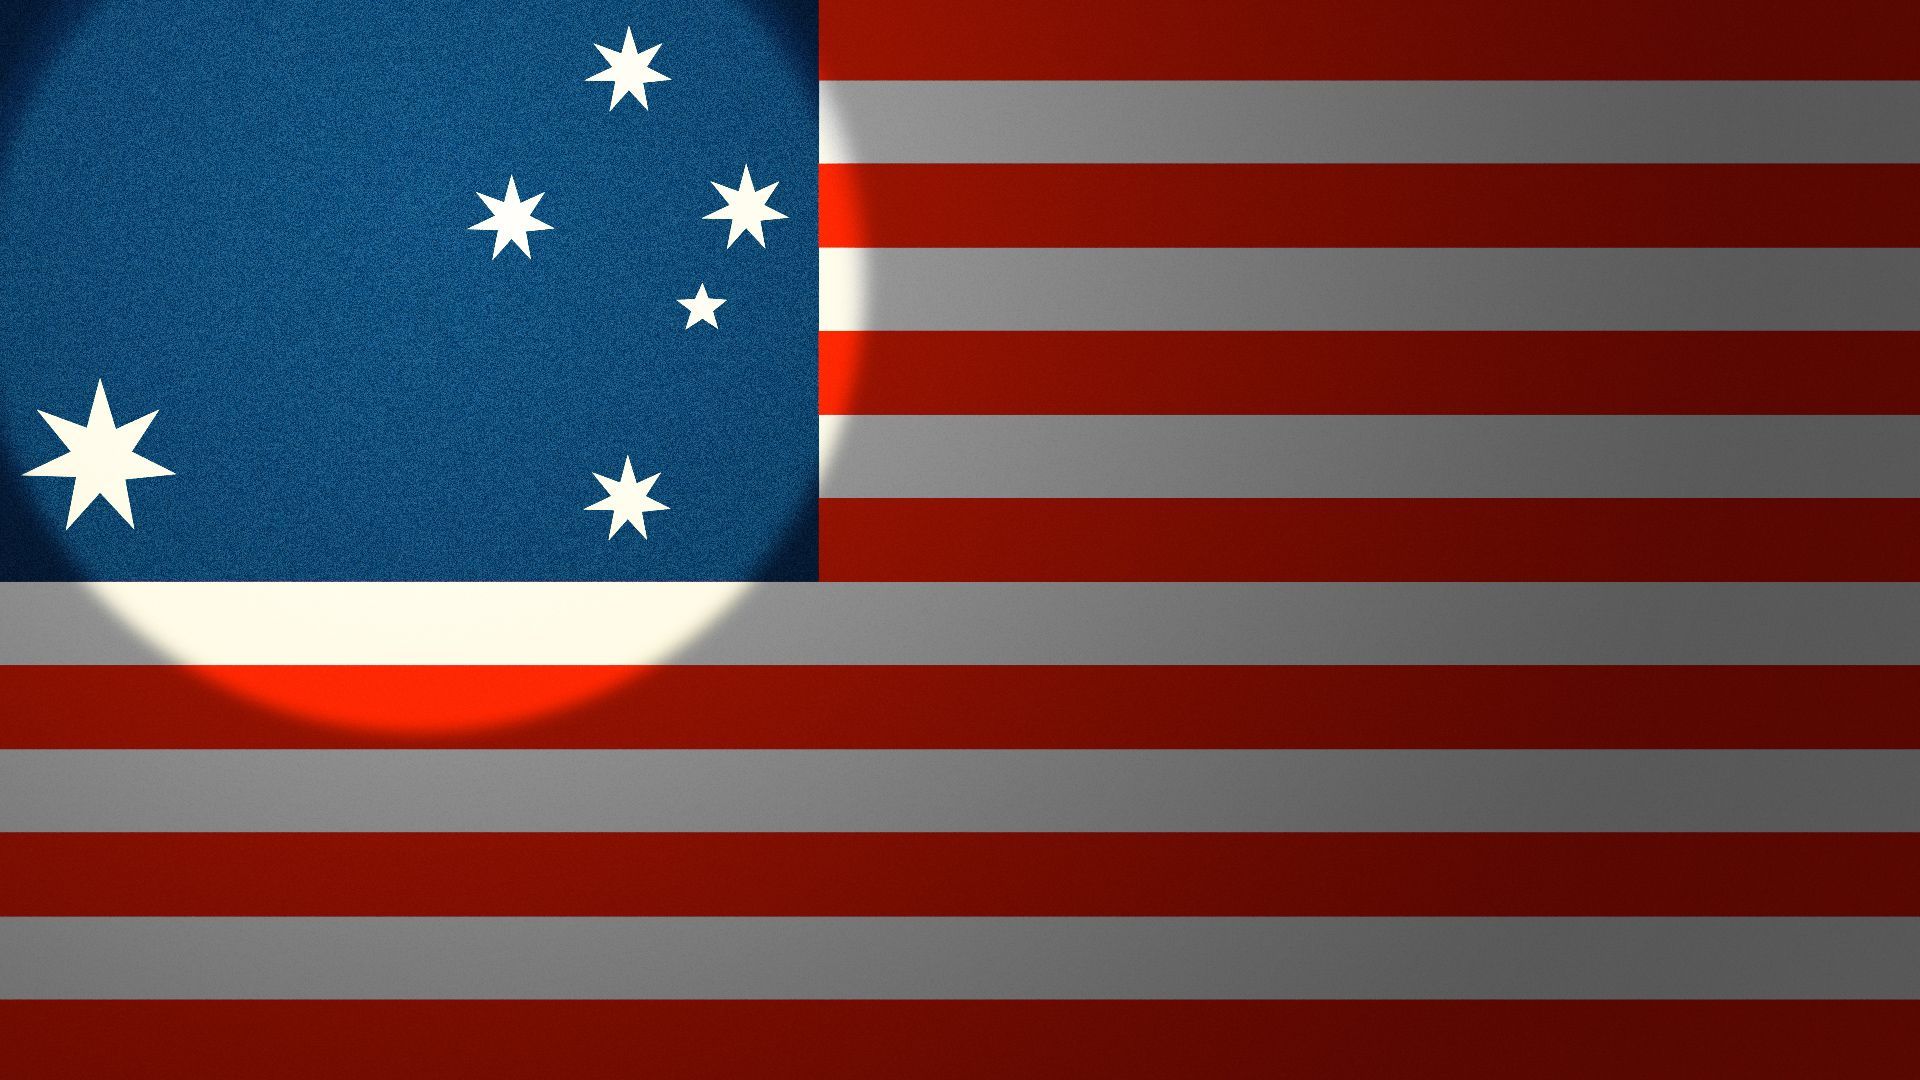 Illustration of the stripes of an American flag, with the Southern Cross from the Australian flag in place of the 50 stars. A spotlight is on the Southern Cross. 